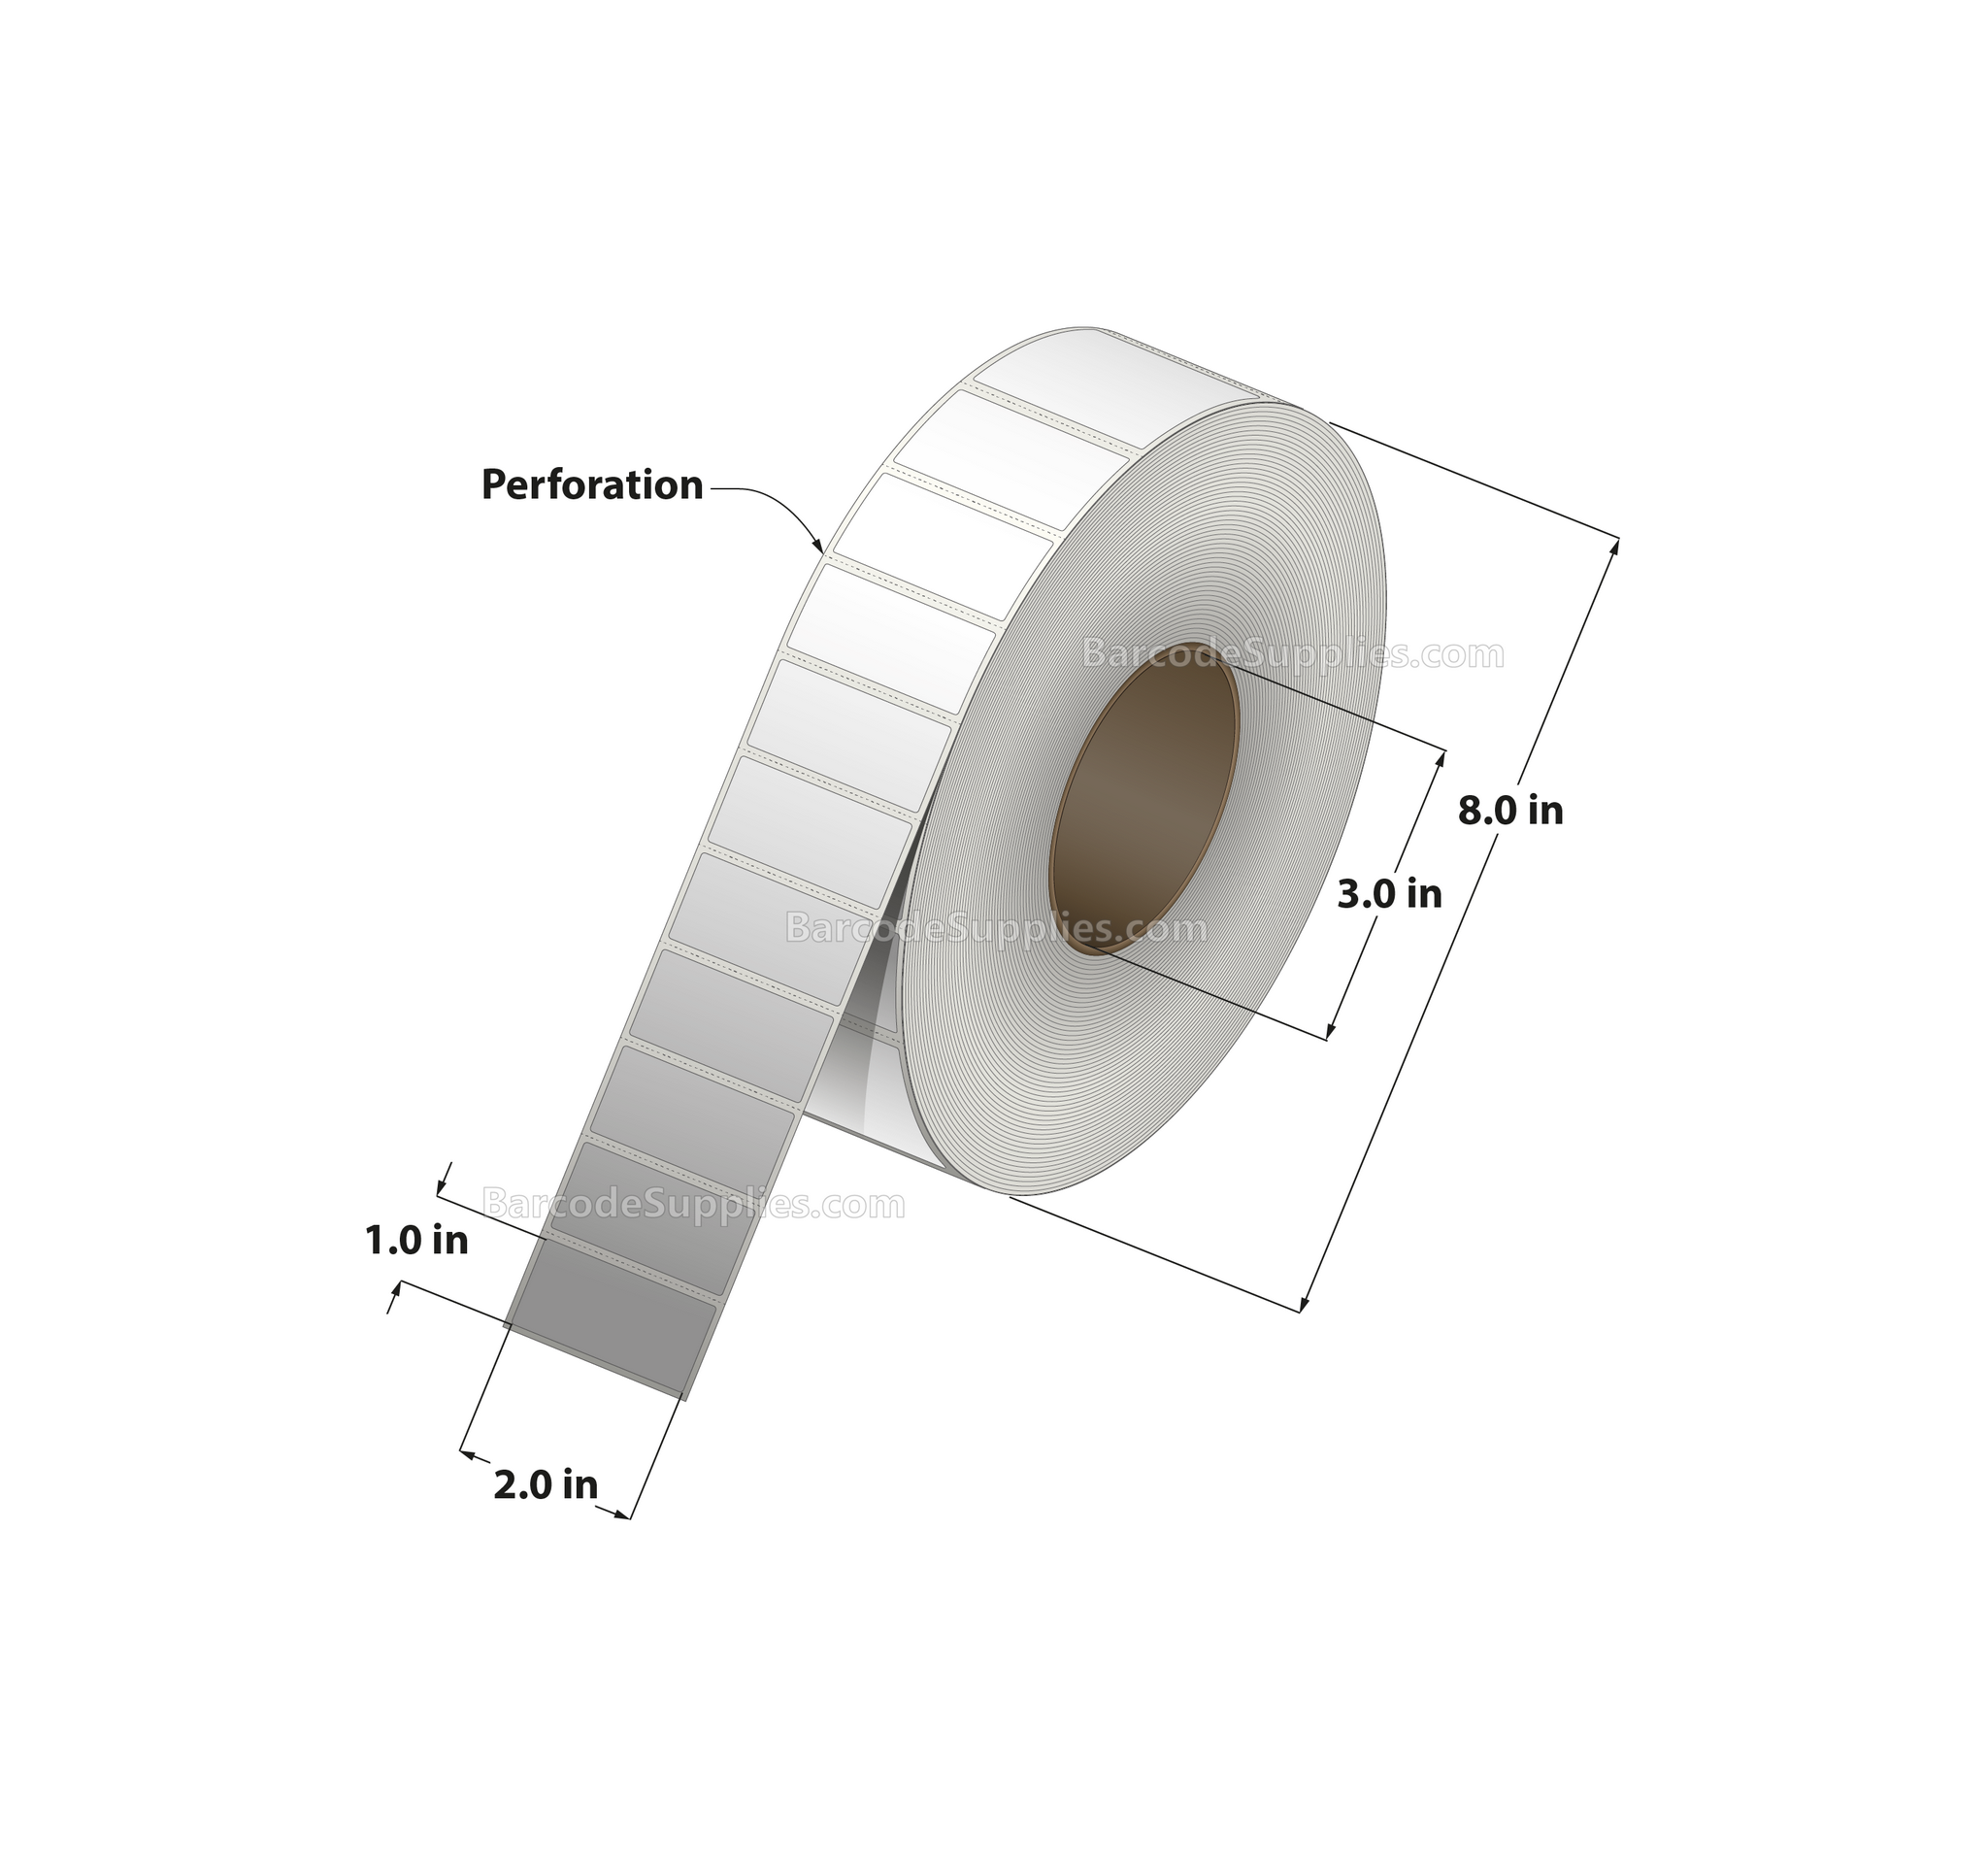 2 x 1 Direct Thermal White Labels With Acrylic Adhesive - Perforated - 5500 Labels Per Roll - Carton Of 8 Rolls - 44000 Labels Total - MPN: RDE-2-1-5500-3